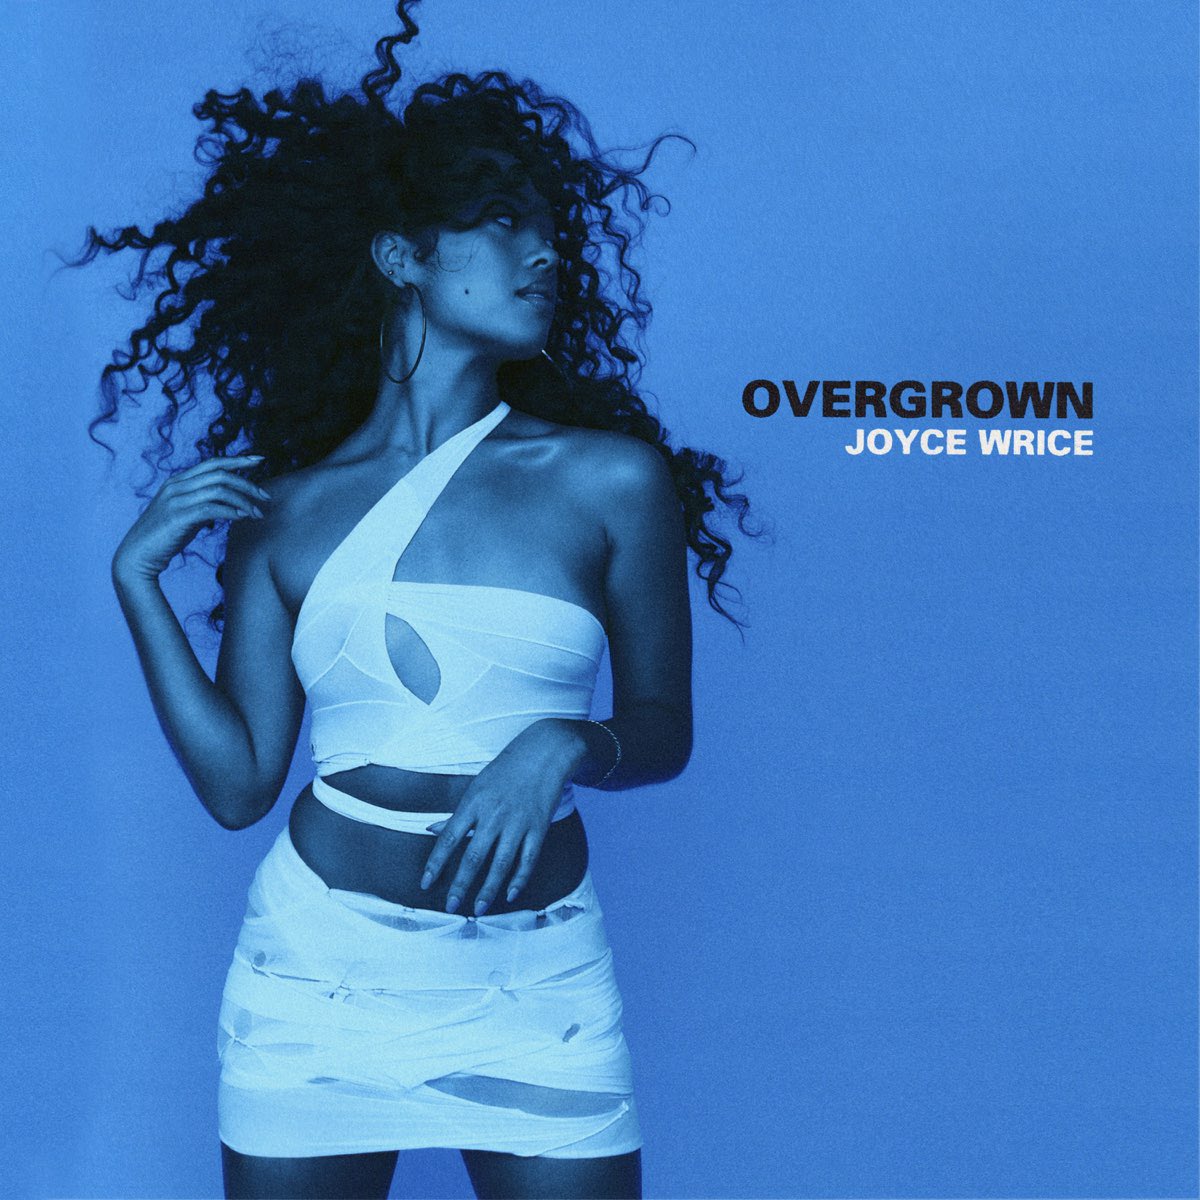 Happy 3rd birthday to Joyce Wrice’s debut album “Overgrown,” released on March 19, 2021! What songs on this album were on your pandemic playlist? #JoyceWrice #Overgrown #Overgrown3 #SoulBounce